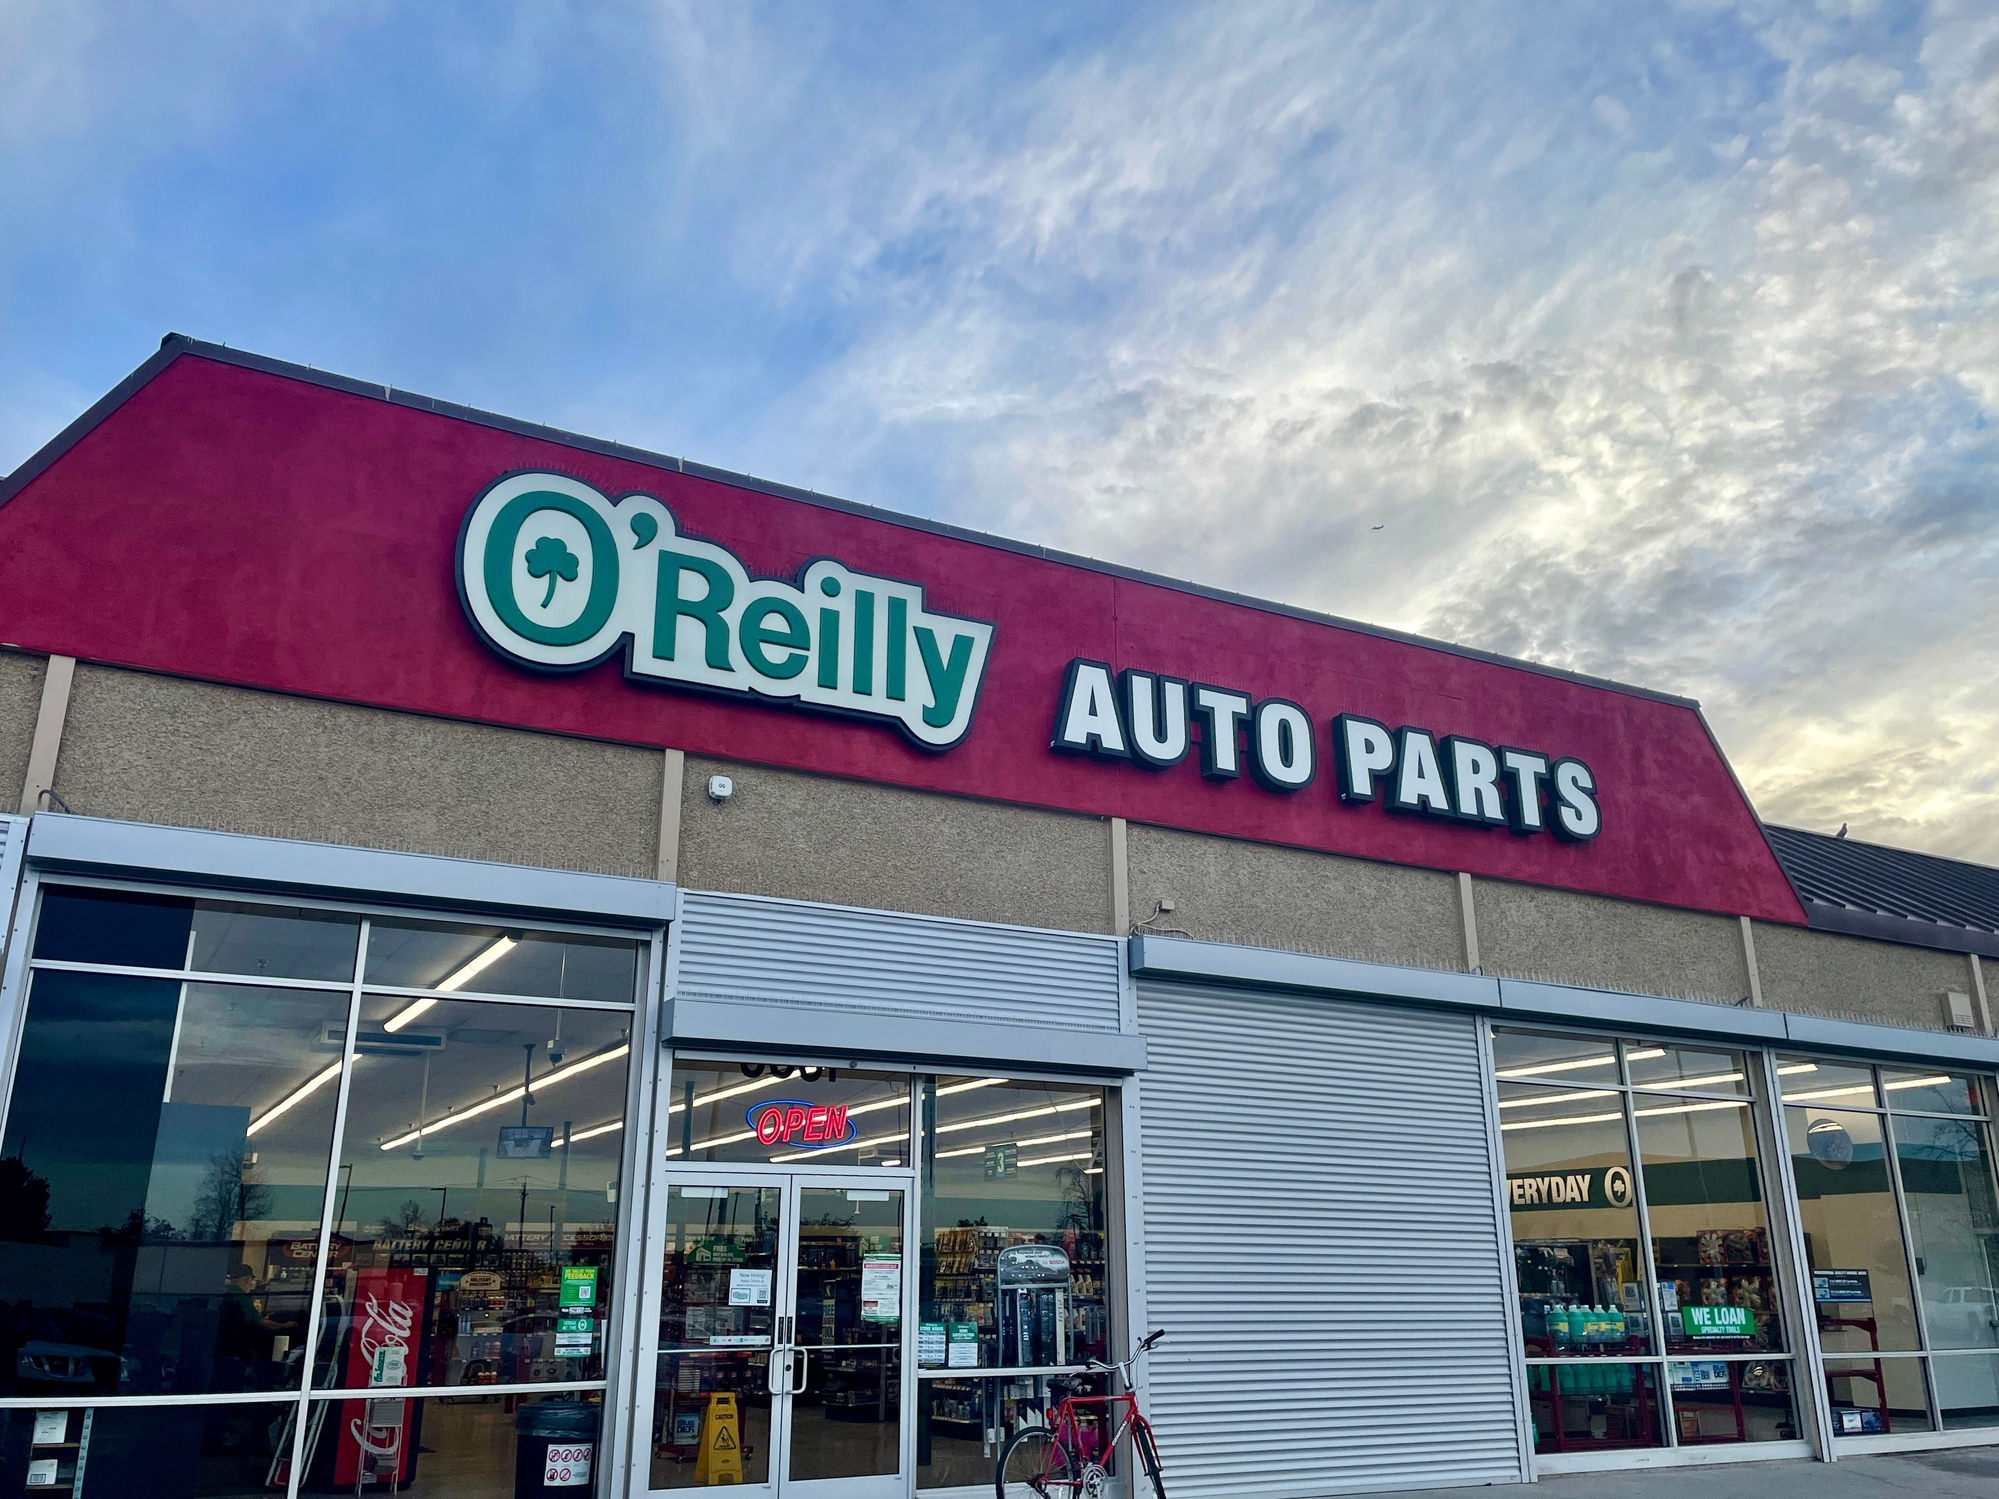 O’Reilly to Open 180-190 New Stores This Year